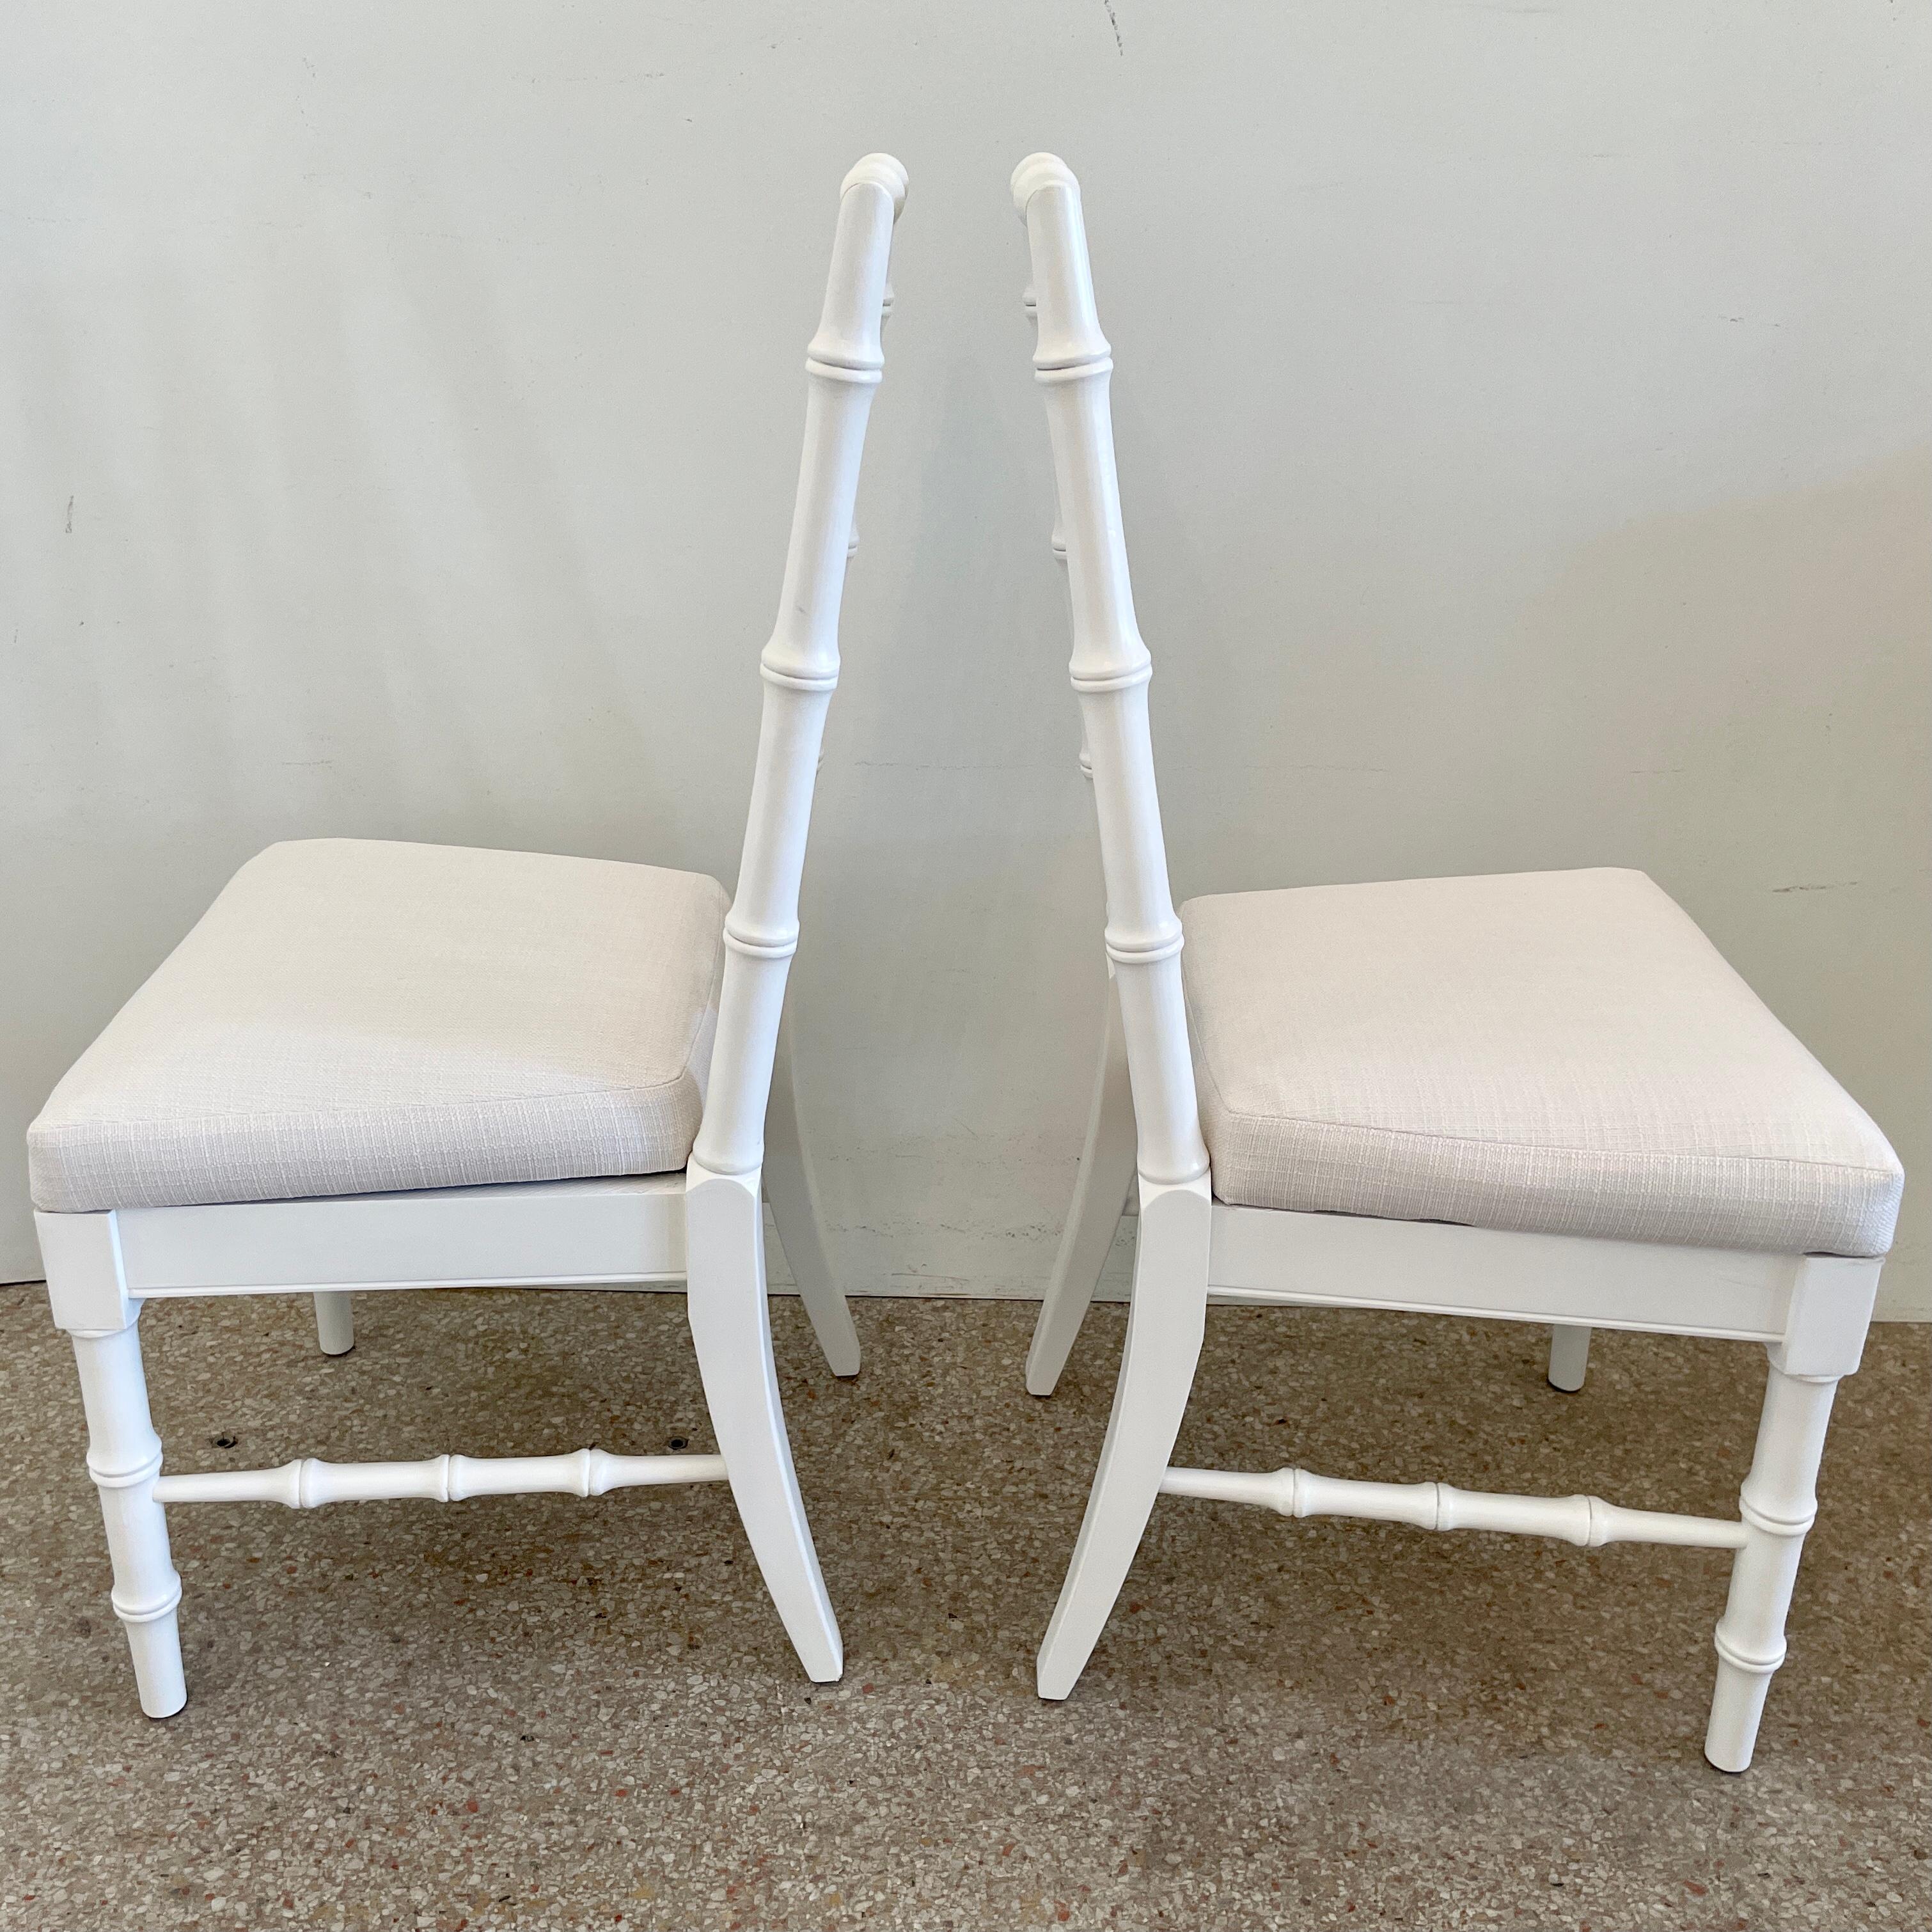 Mid-20th Century Faux Bamboo Dining Chairs in White Lacquer and Todd Hase Textiles, Set of 4 For Sale